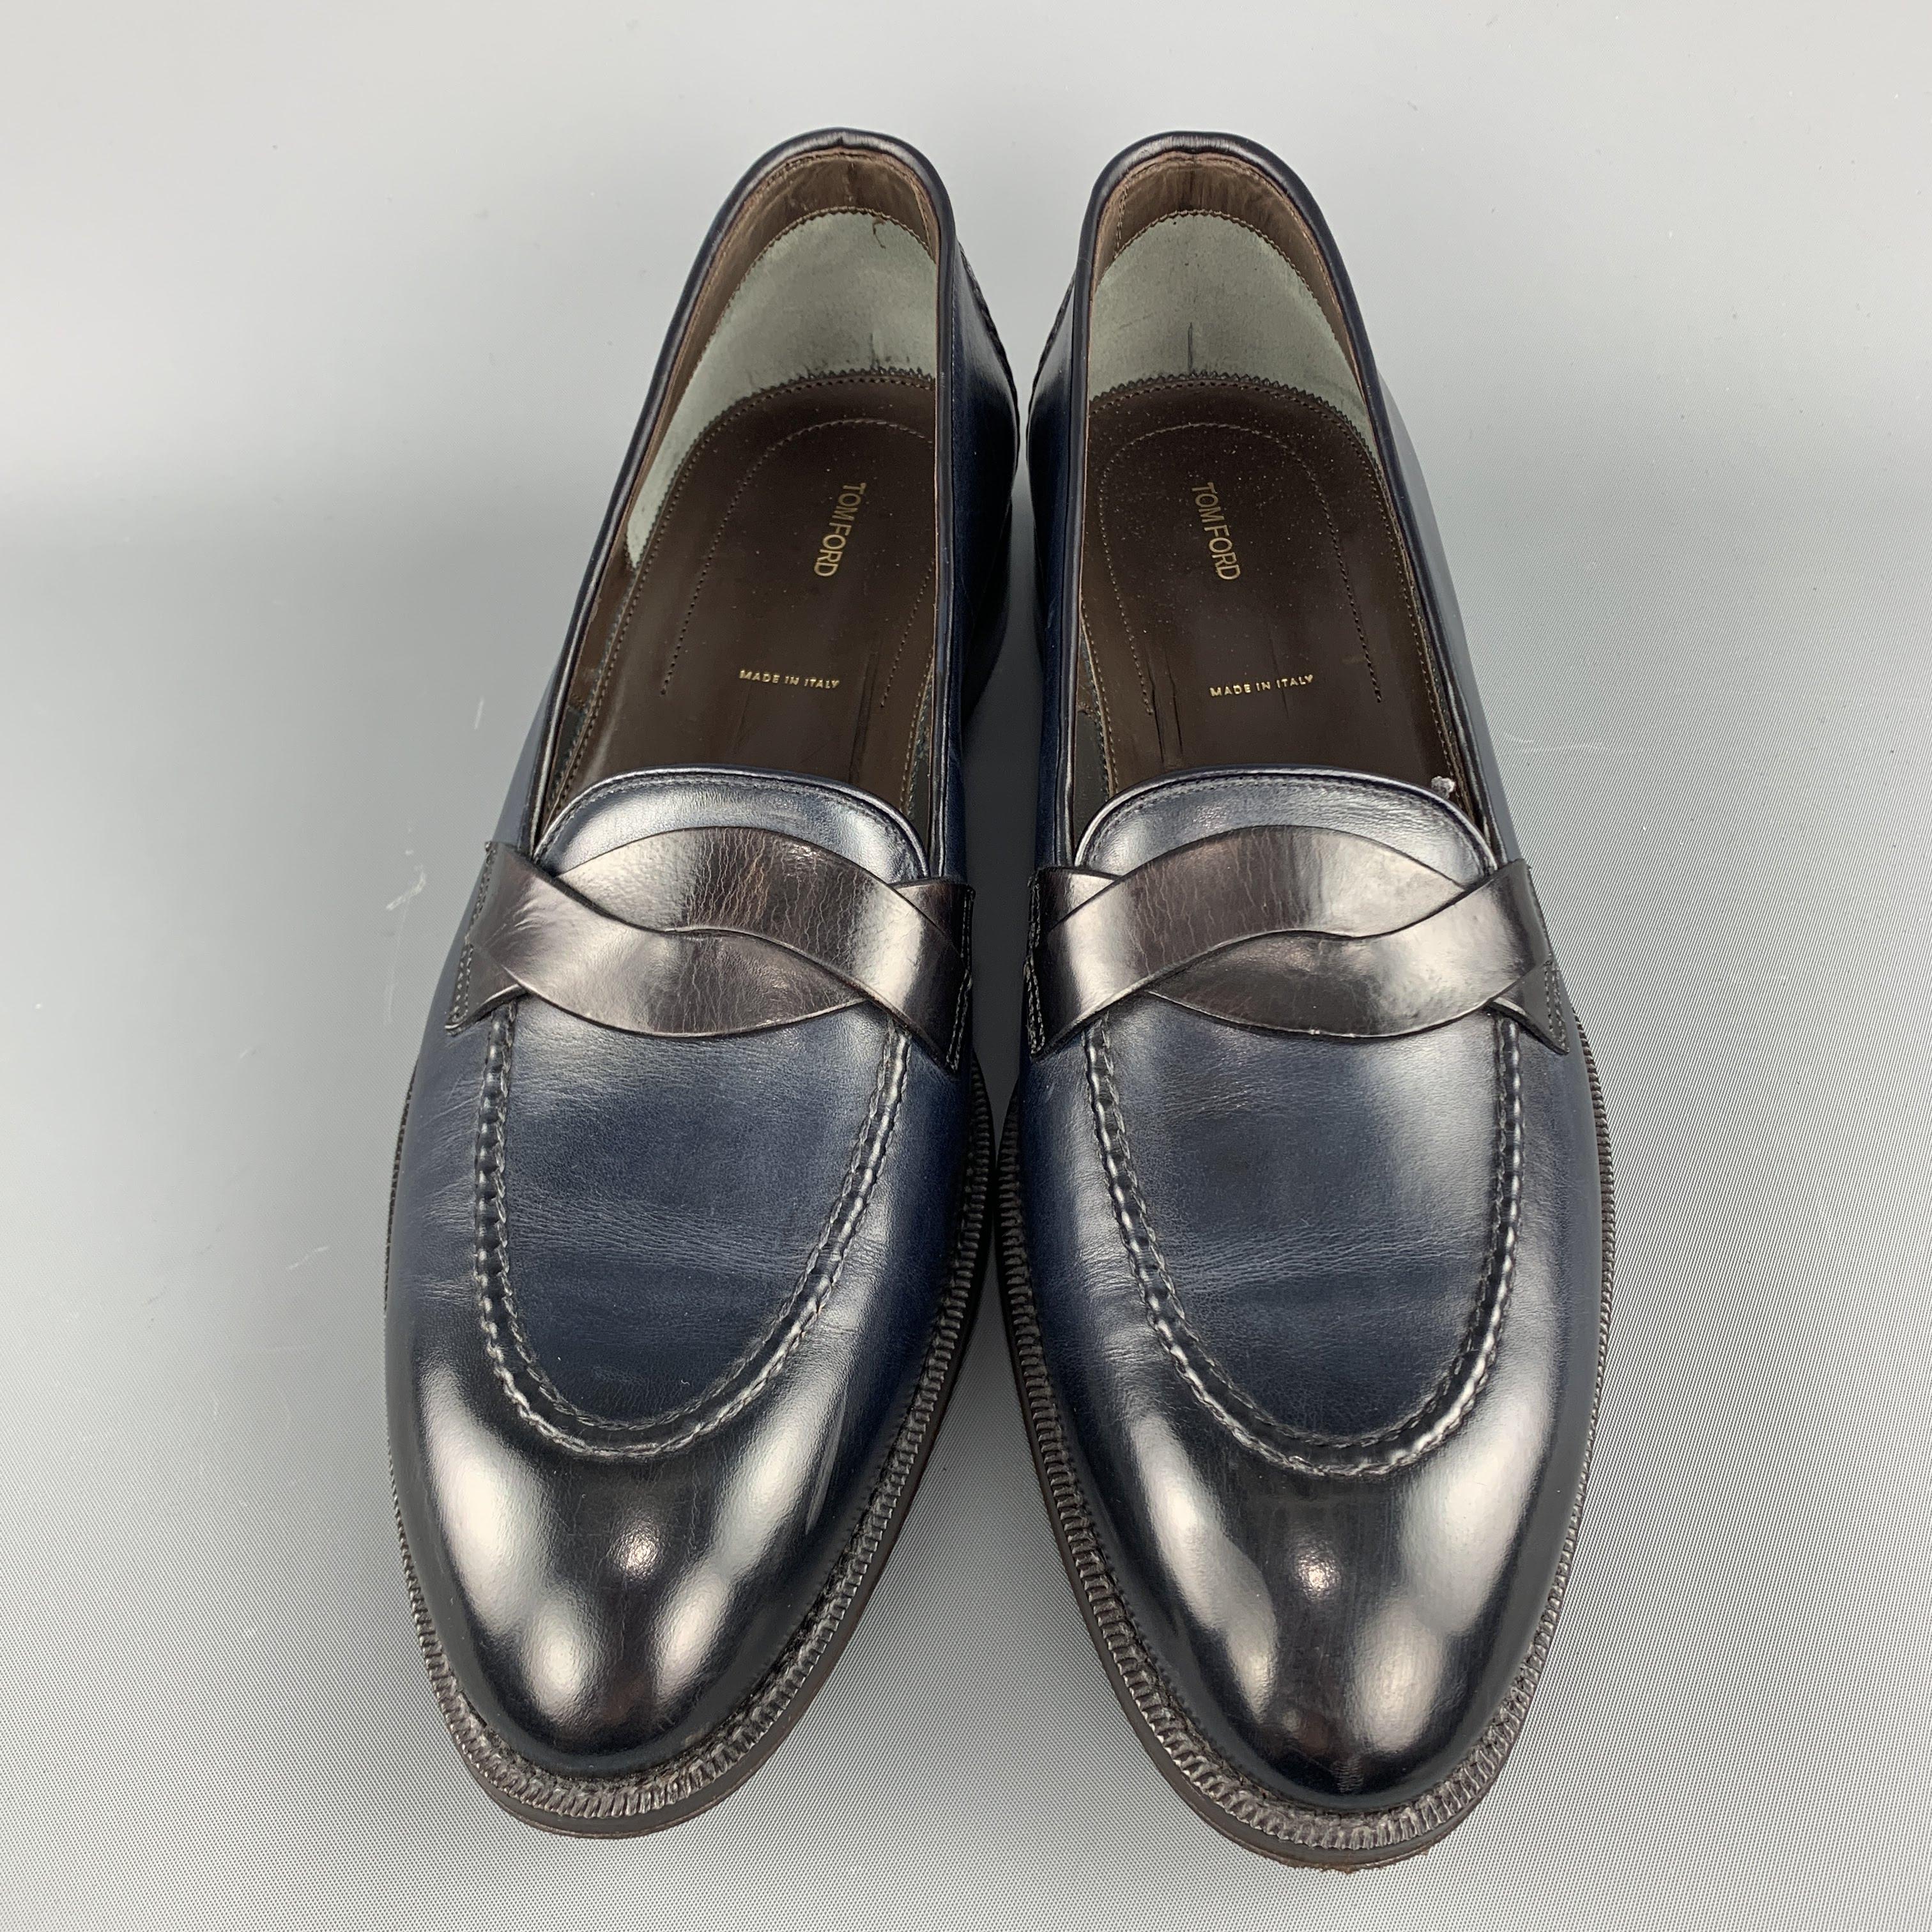 TOM FORD Elkan Twisted Band dress loafers come in antique effect navy blue leather with an apron toe and twist strap detail. Made in Italy.
 
Very Good Pre-Owned Condition.
Marked: 10
 
Outsole: 12 x 4 in.